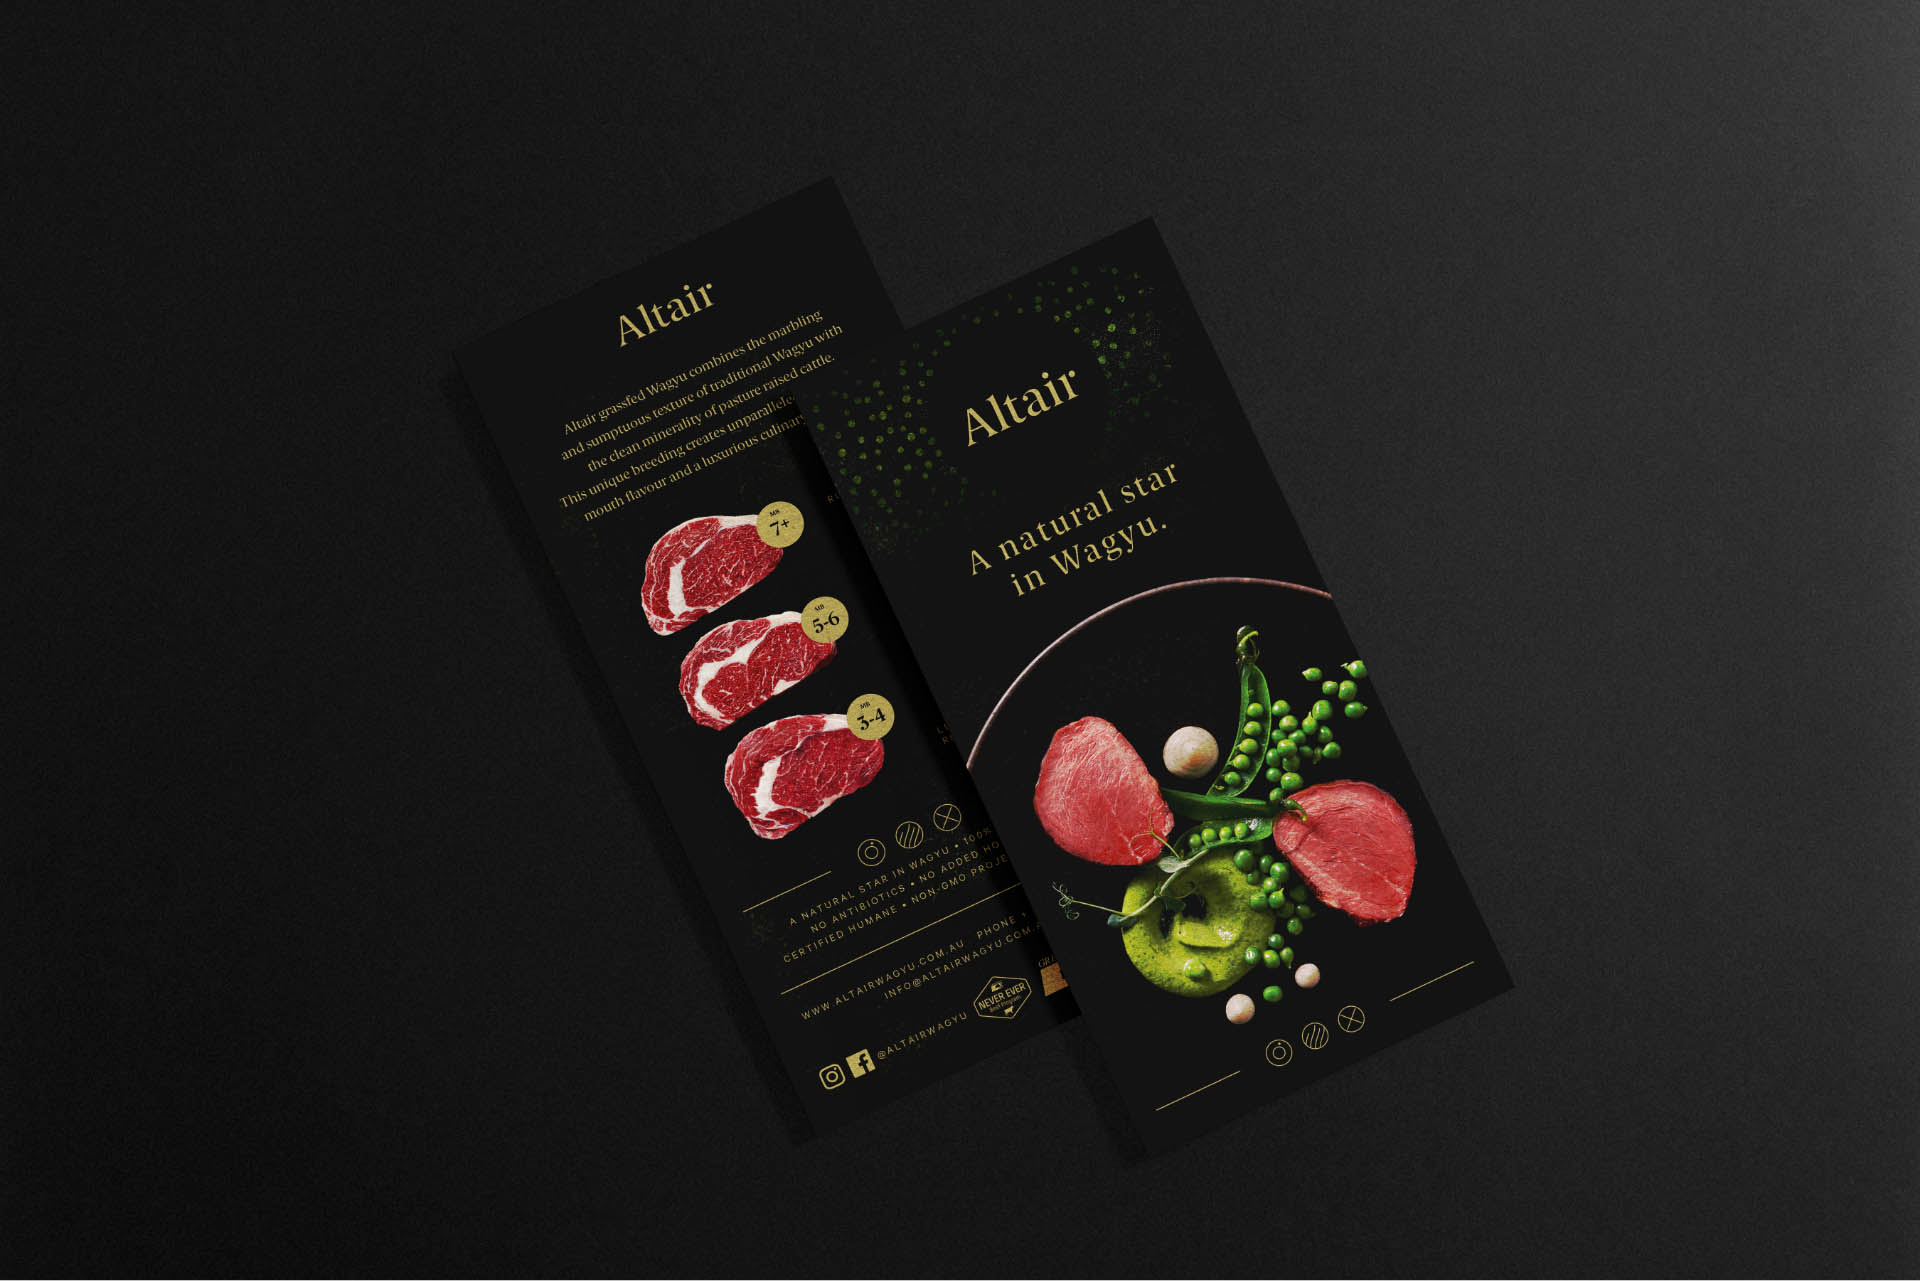 Altair printed DL flyer. Image shows both front and back sides.